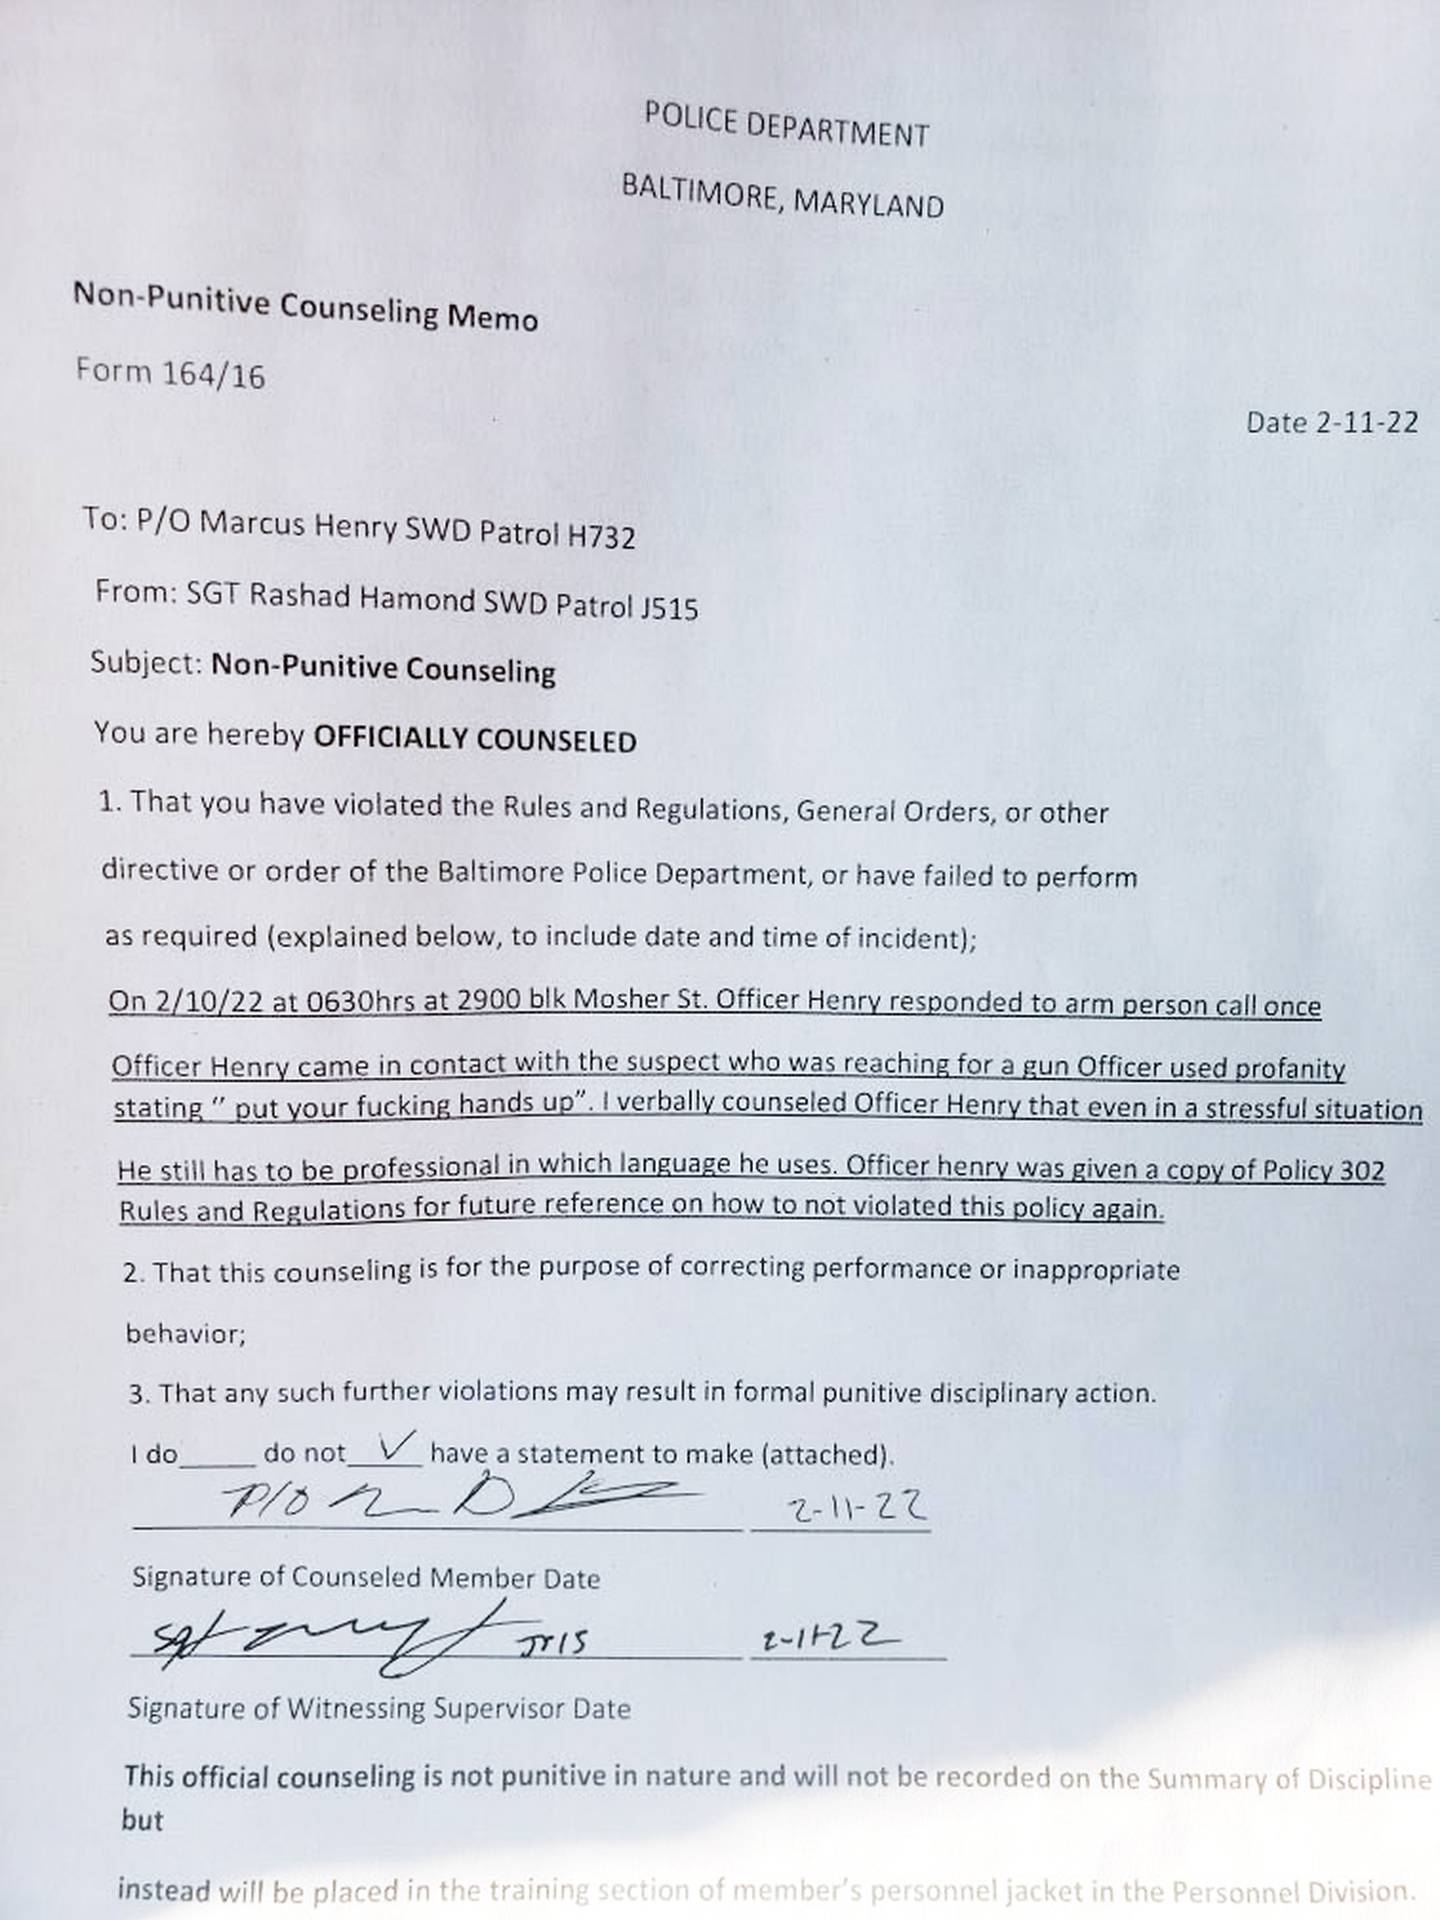 Marcus Henry left the BPD this month after 17 years, saying manpower shortages create an officer safety issue, which creates a public safety issue. Here, he displays a disciplinary form for using unprofessional language towards an armed person. The complaint was generated internally from a review of body camera footage.